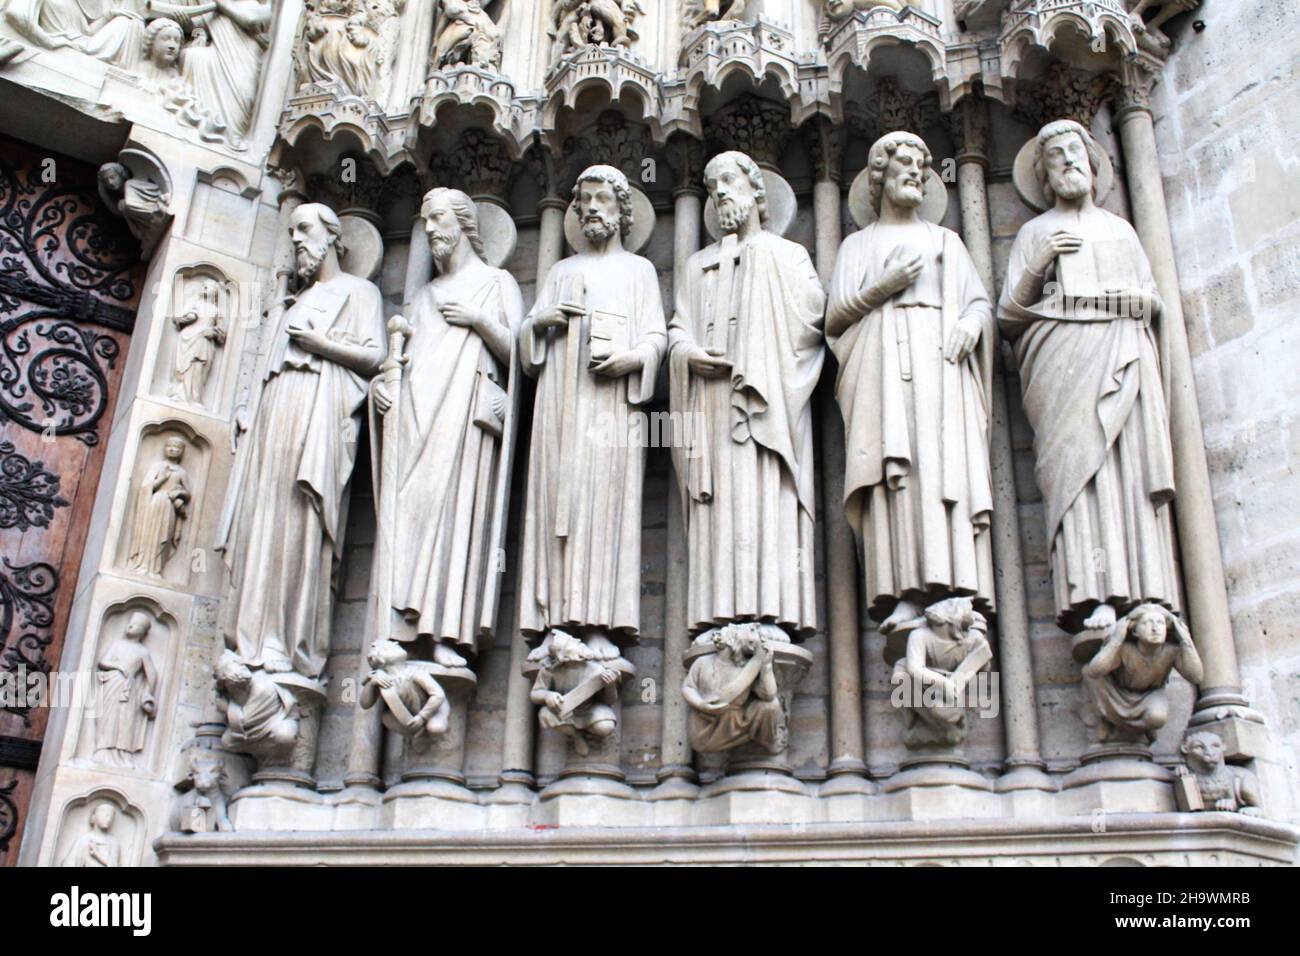 Historic statues of Saints Paul, James, Thomas, Philip, Jude and Matthew flank the entrance on the façade of Notre Dame Cathedral in Paris, France. Stock Photo